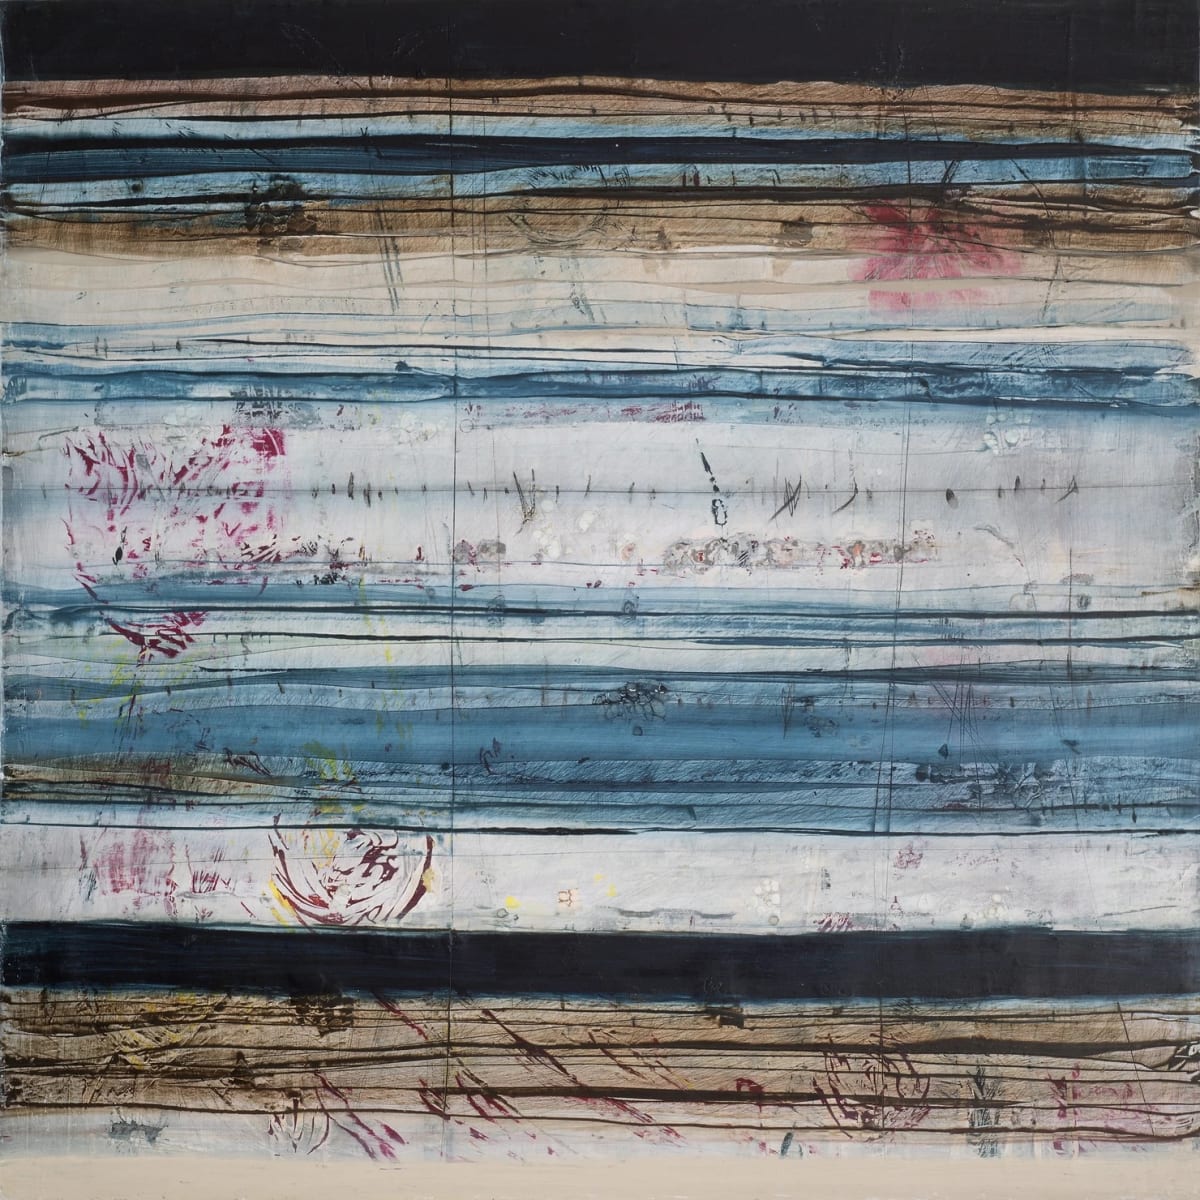 Forgotten Dreams by John Worth  Image: Square striped mixed media abstract painting.